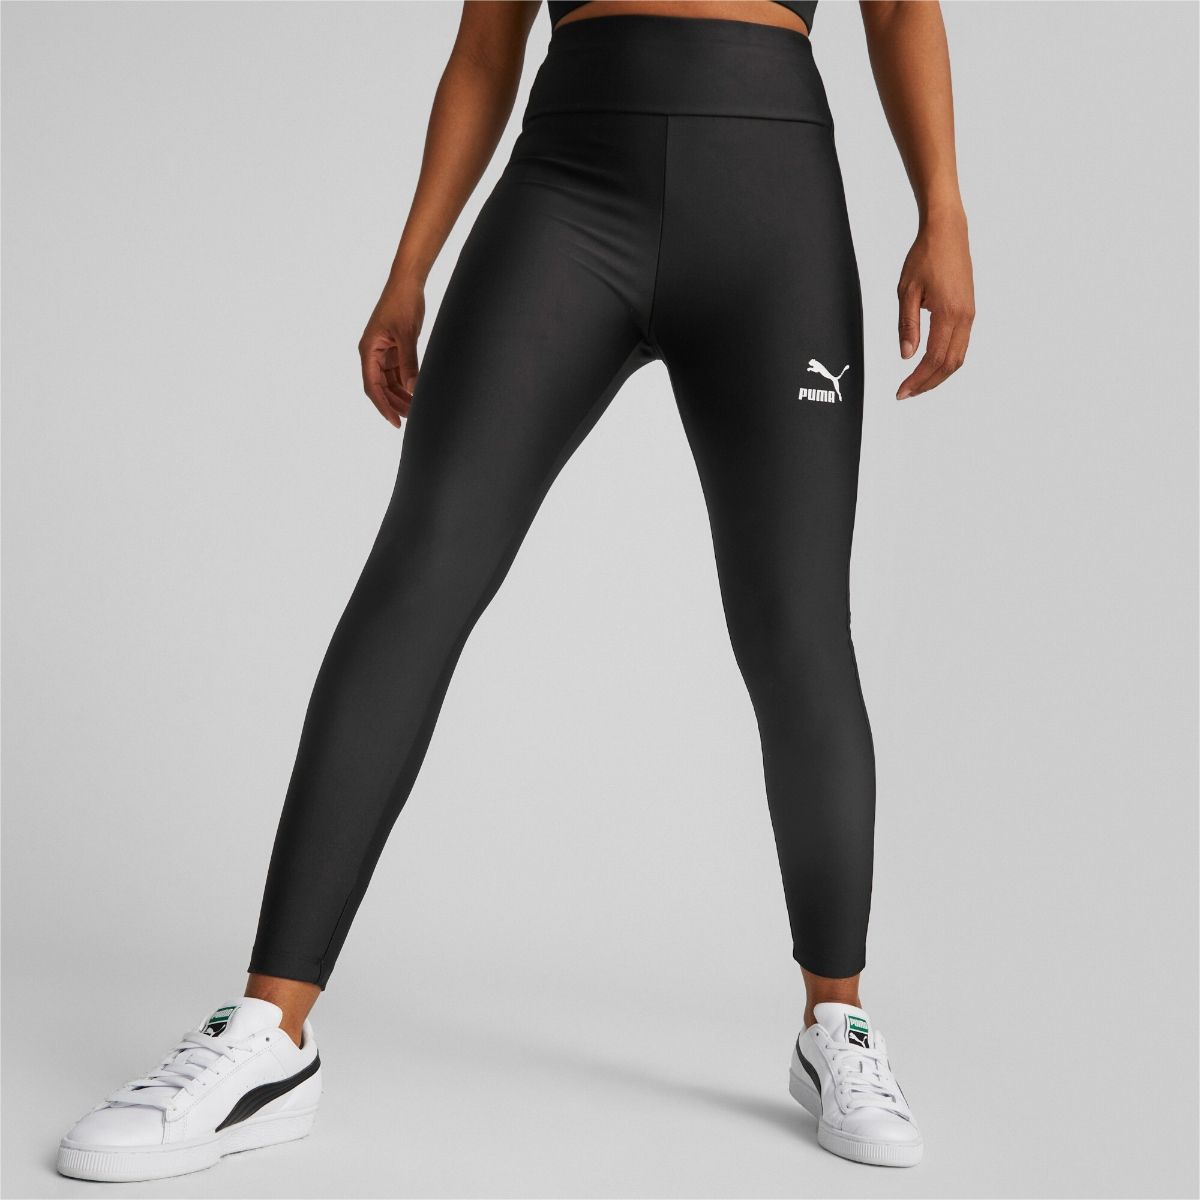 Buy Puma Women's Fitted Leggings (84559201_Black-Gold at Amazon.in